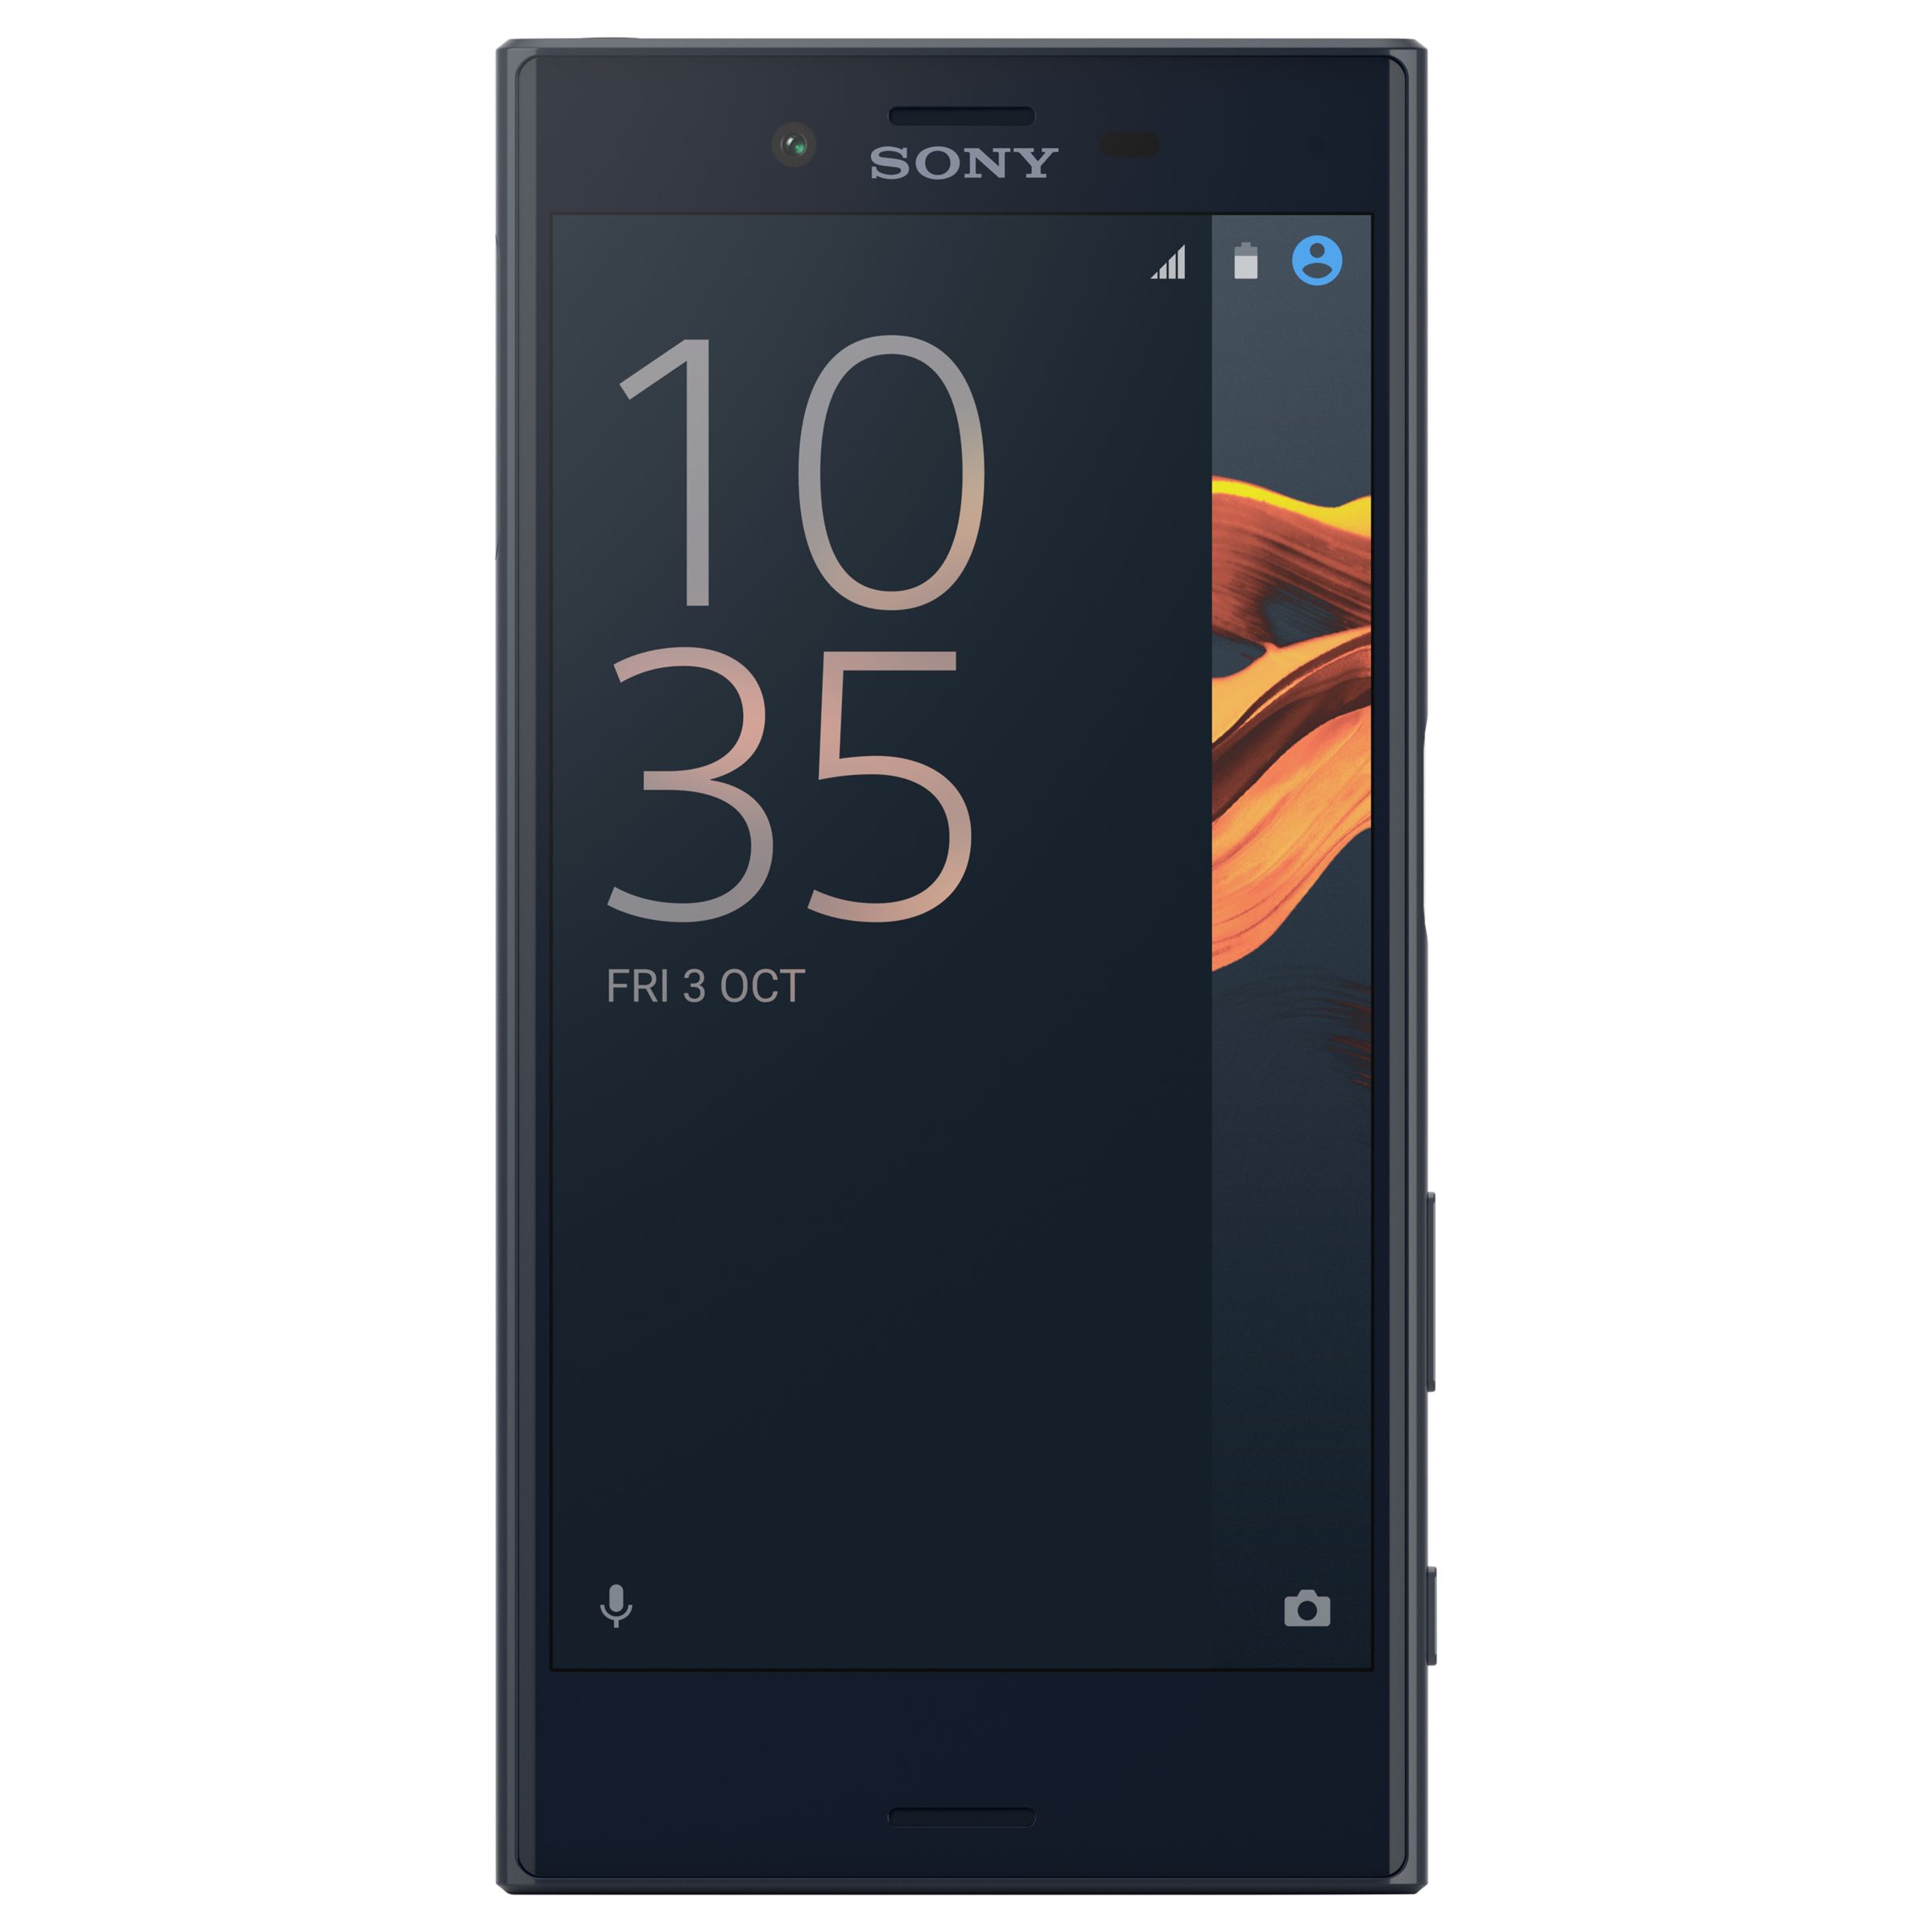 Sony Xperia X Compact Smartphone, Android, 4.6", 4G LTE, SIM Free, 32GB